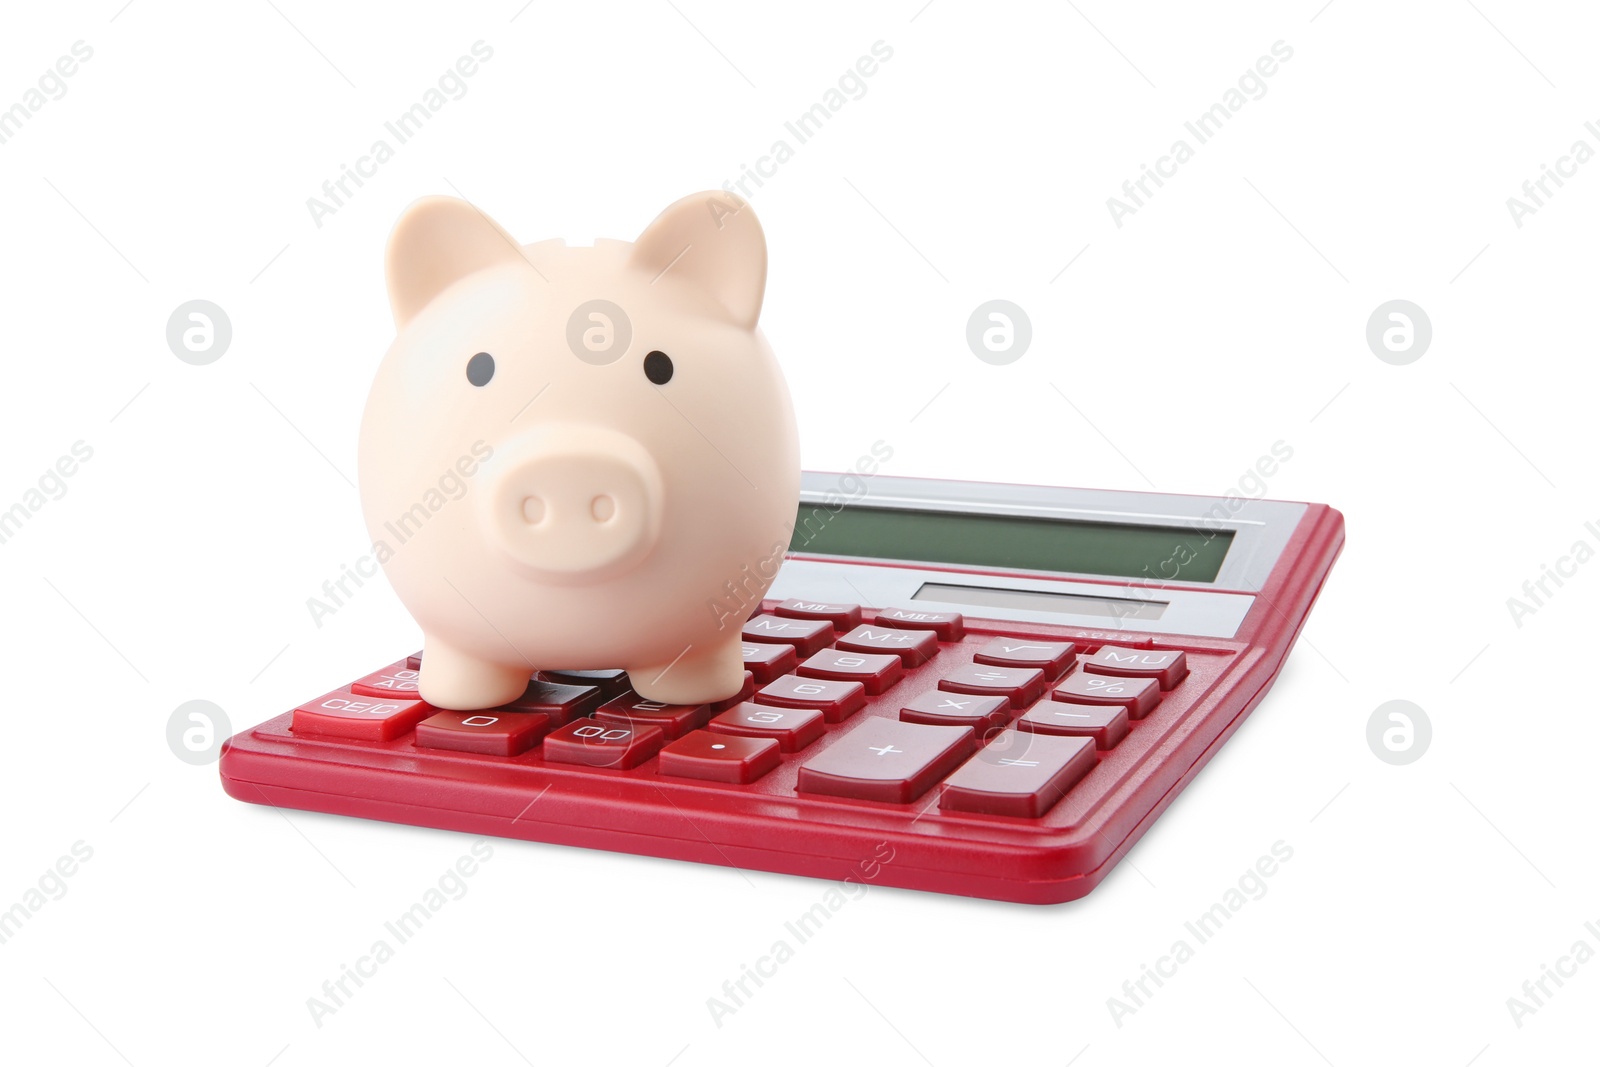 Photo of Calculator and piggy bank isolated on white